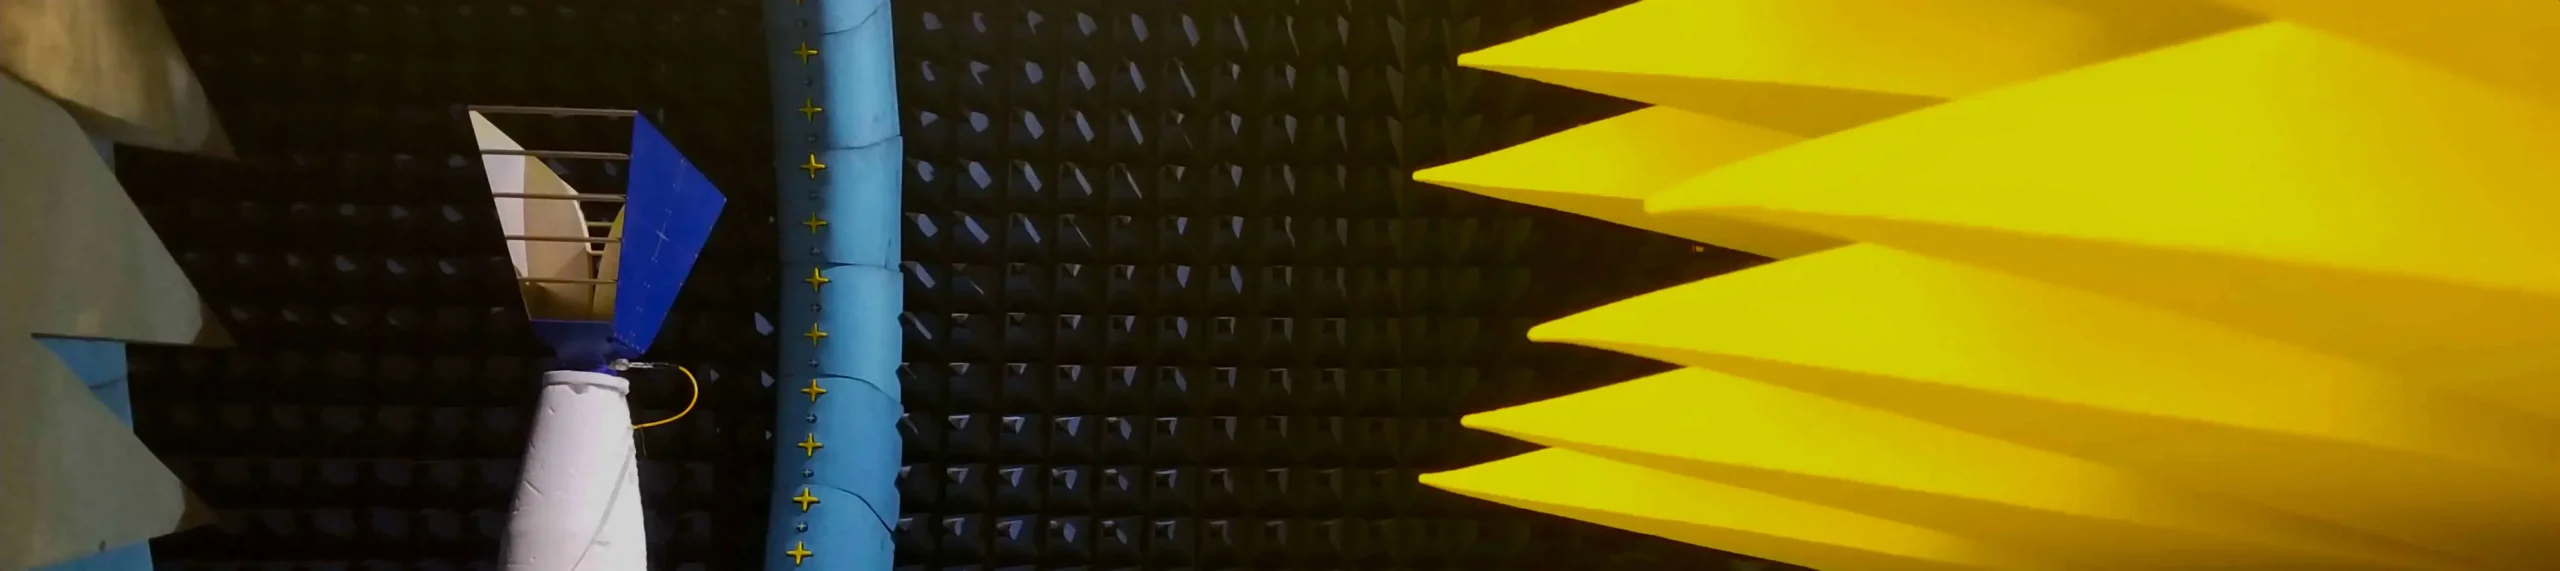 RF Anechoic chamber used for radiated measurements of wireless devices to ascertain antenna efficiencies, total radiated power and total isotropic sensitivity